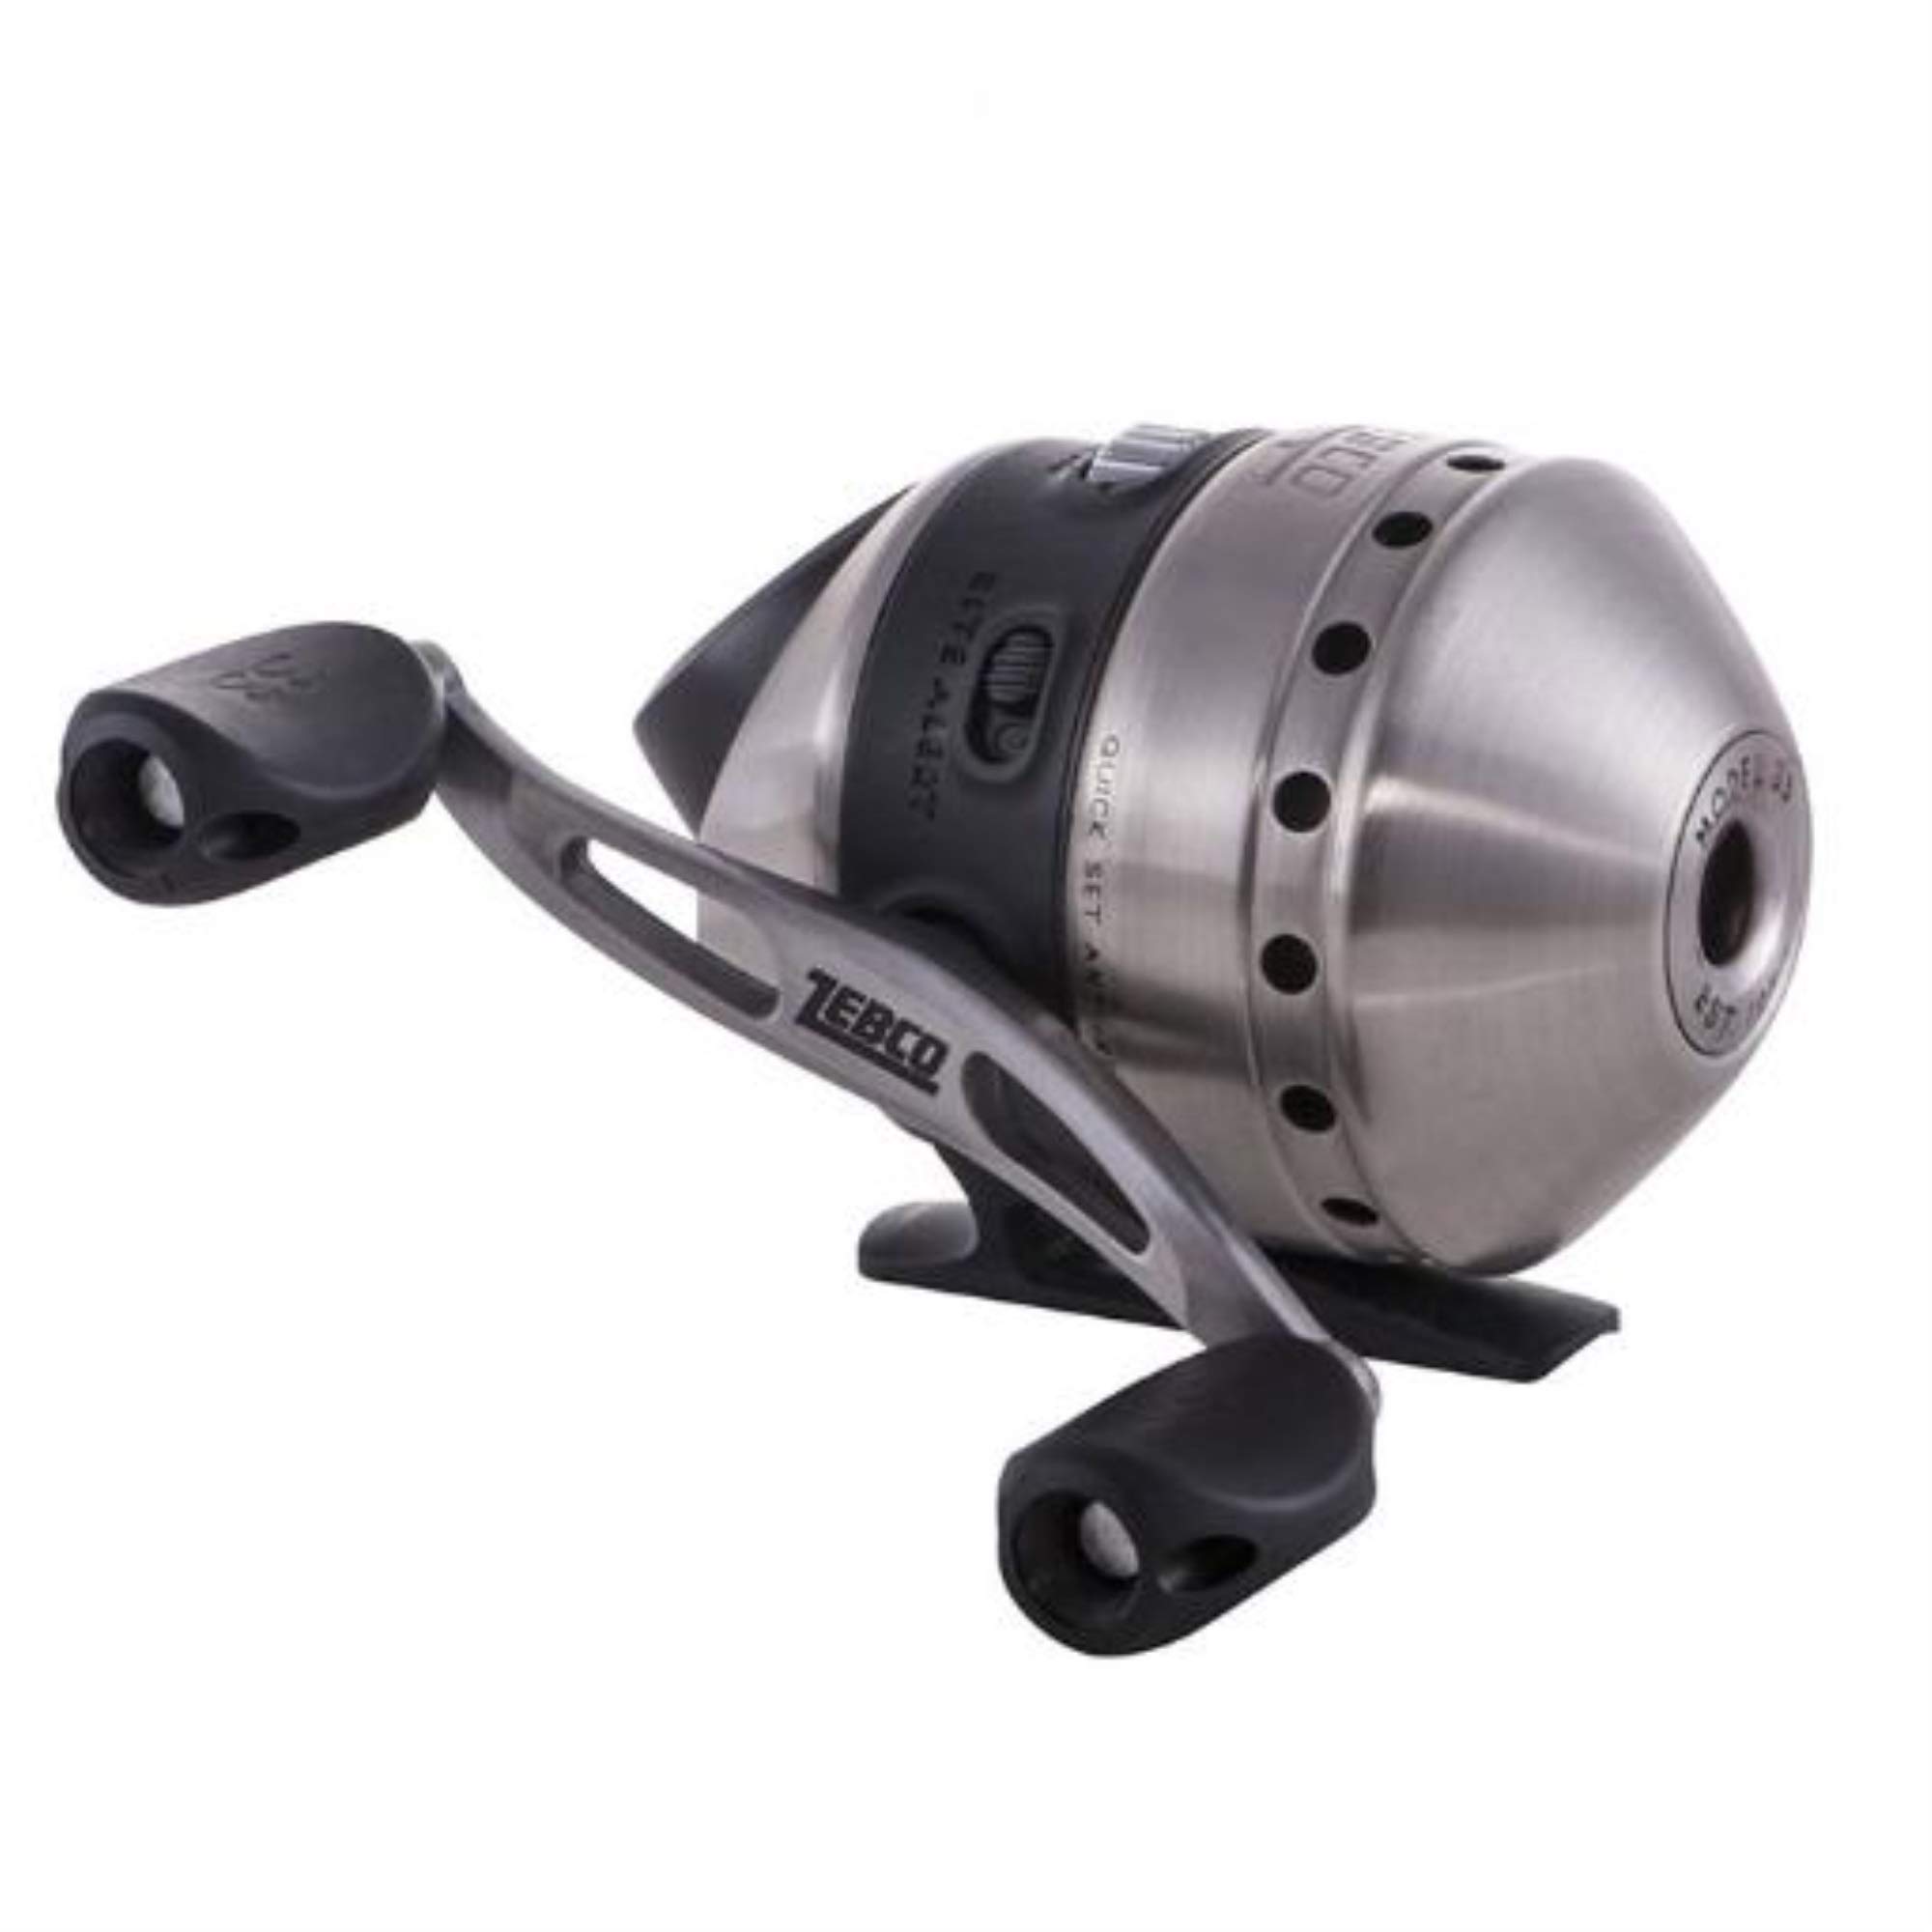 Zebco 33 Spinning Reel and Telescopic Fishing Rod Combo 6 Foot - Spincast